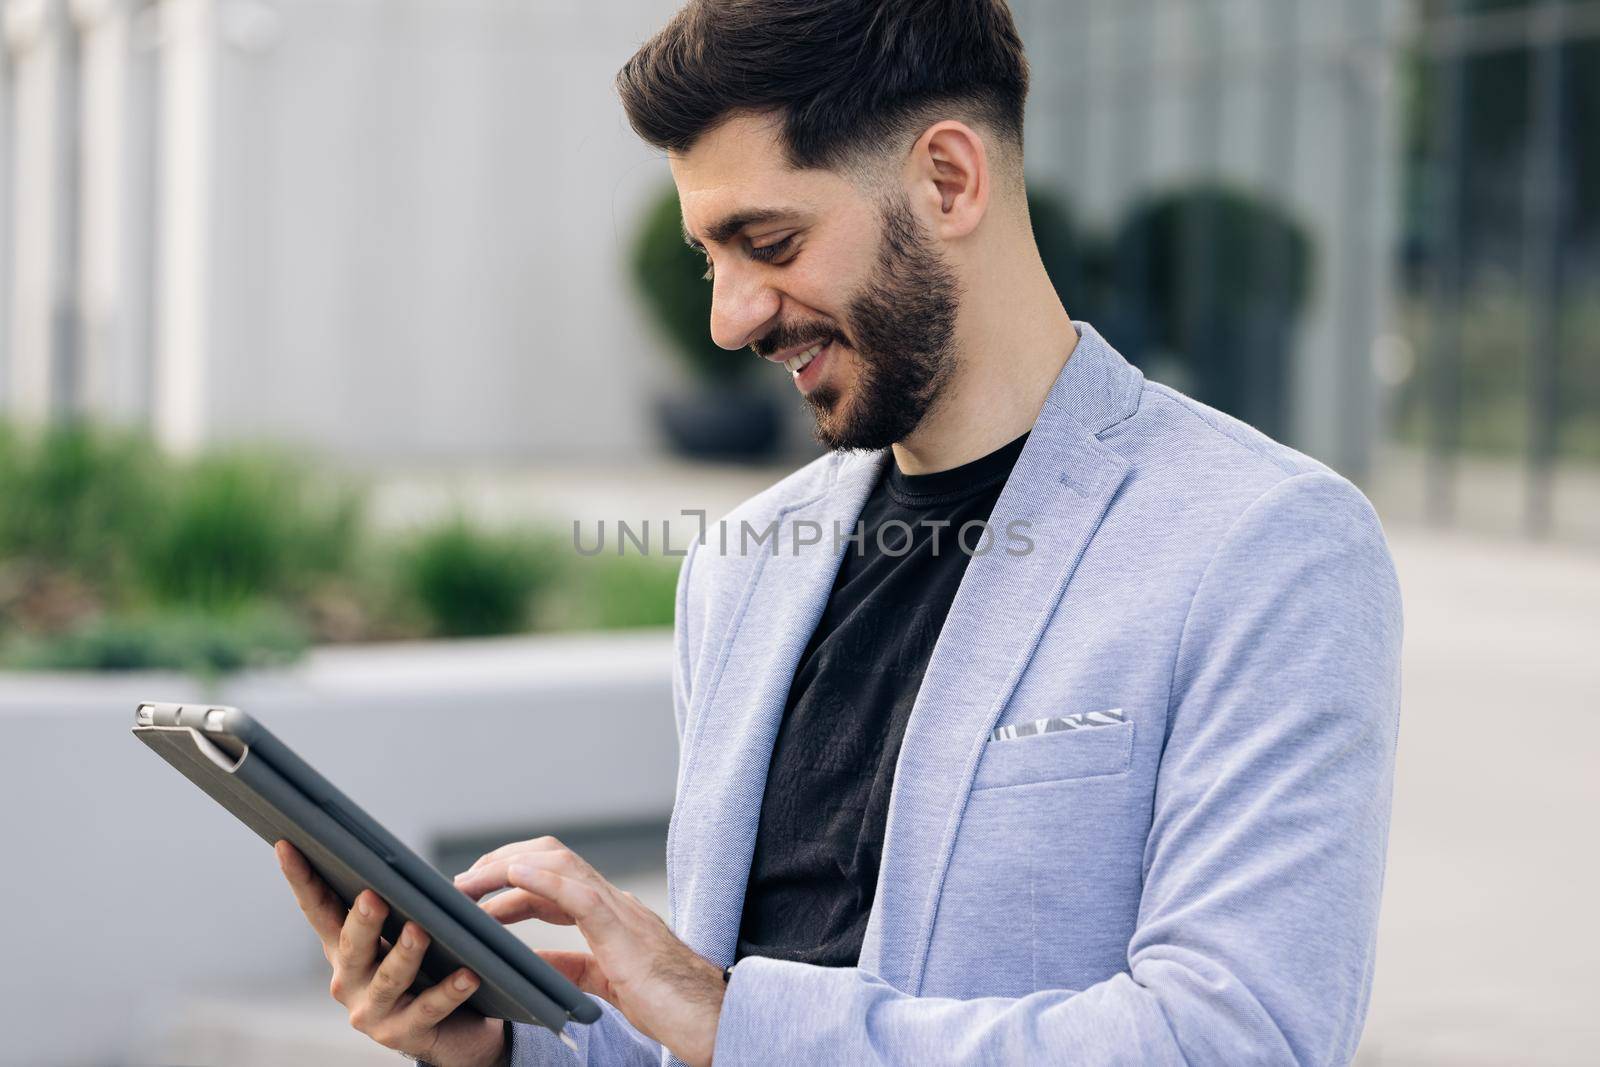 Happy face looking tablet screen outdoors. Elegant male chatting online with digital device outside. Businessman holding tablet in hands using business apps on tablet computer by uflypro